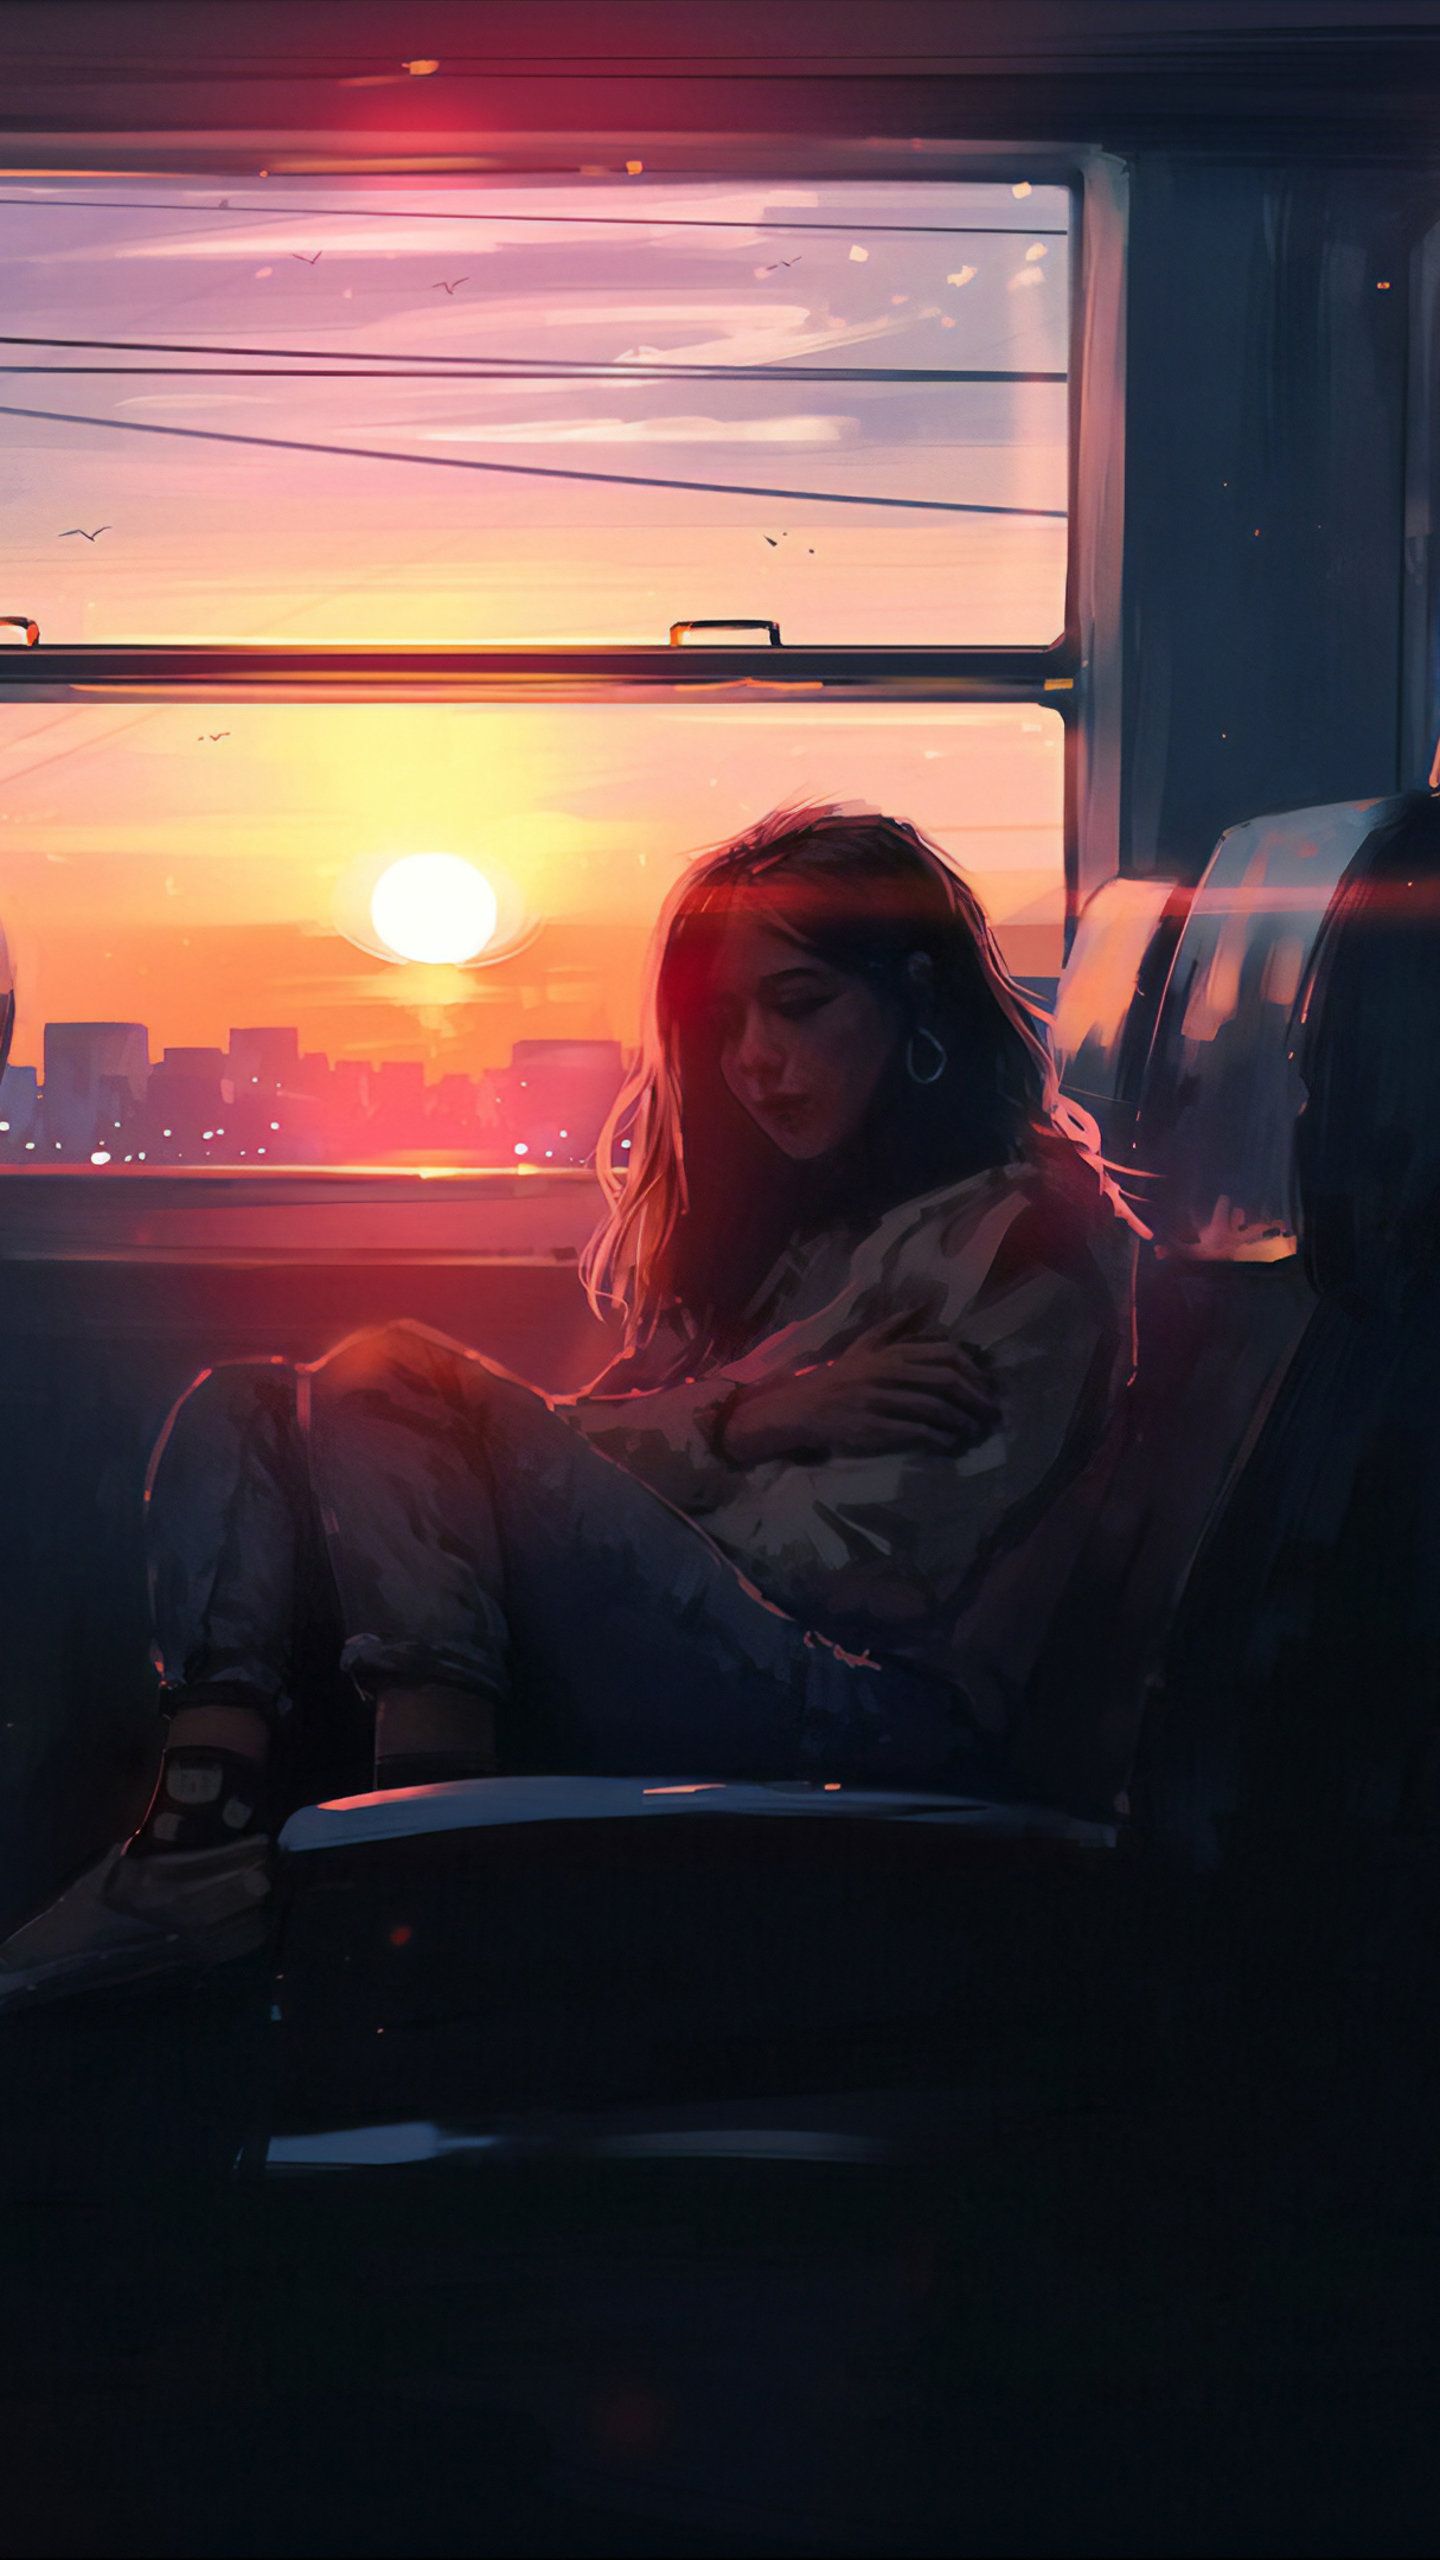 Alone Bus Ride, HD Artist Wallpaper Photo and Picture. Lonely art, Anime scenery wallpaper, Dreamy art